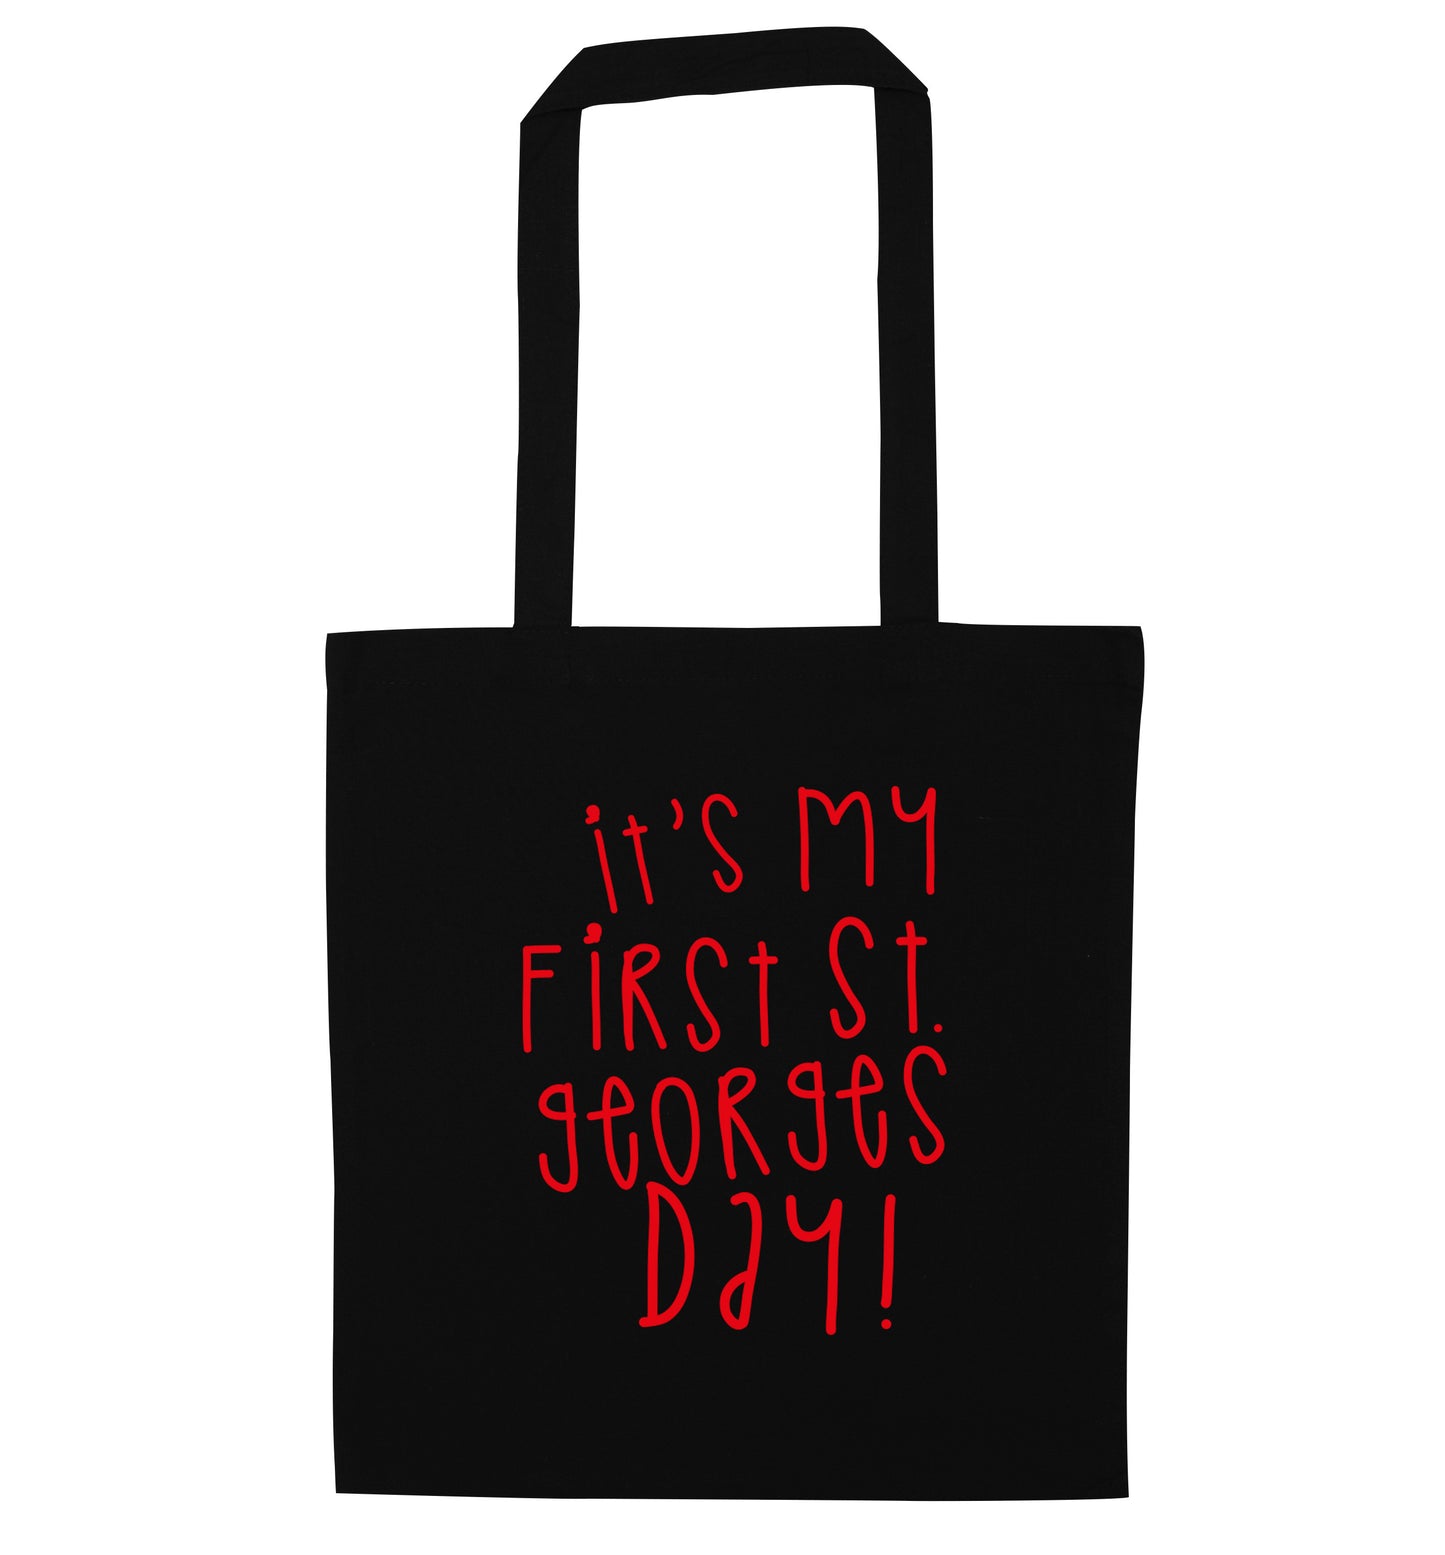 It's my first St Georges day black tote bag